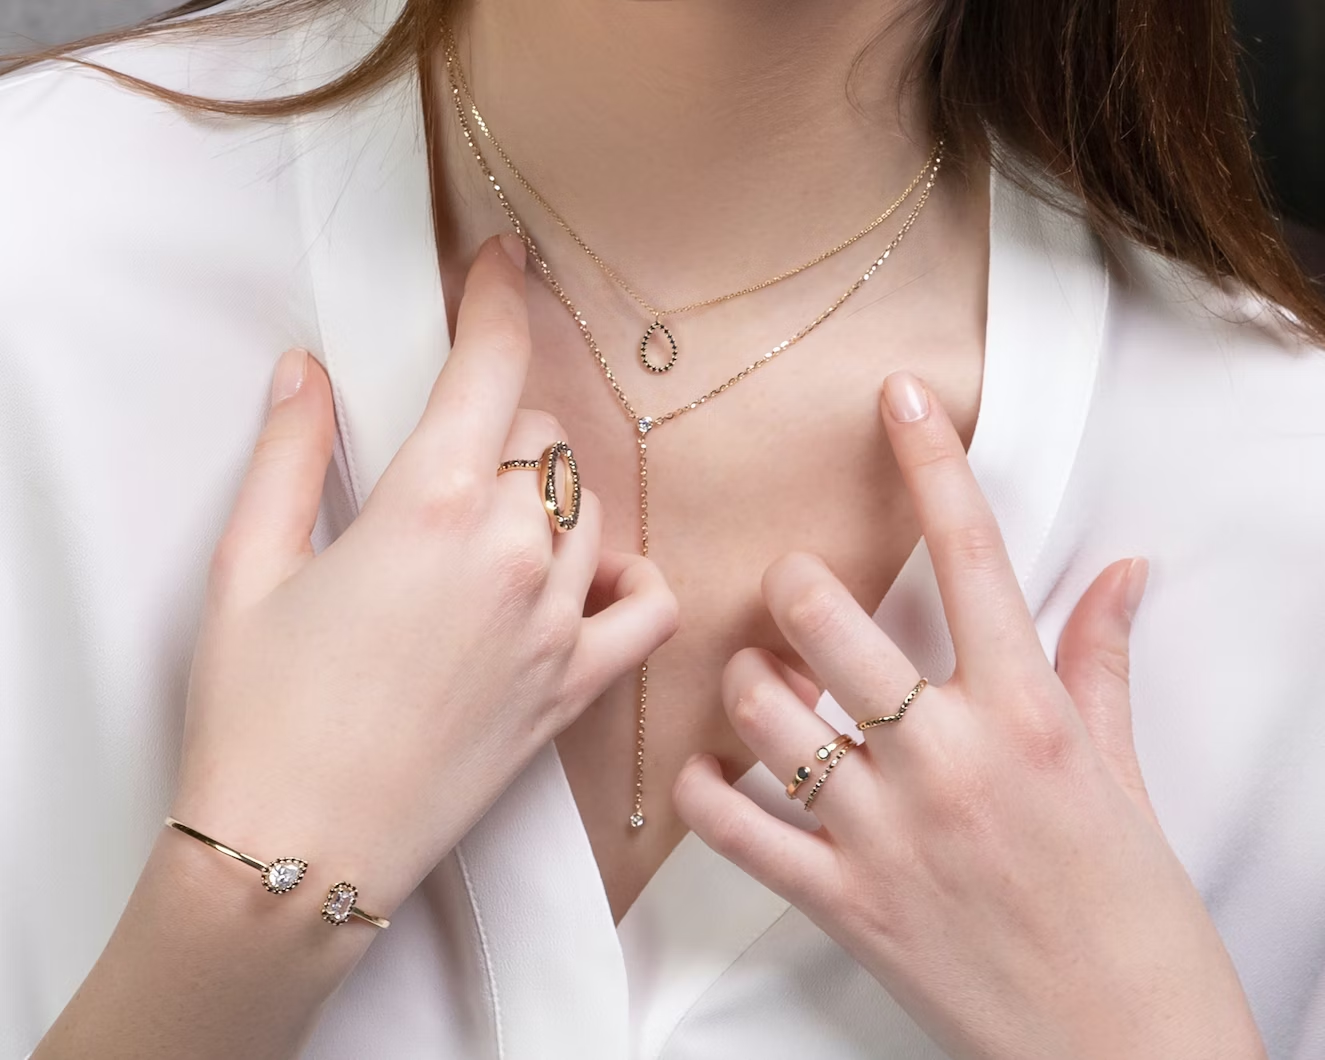 What's Your Style? How to Find Jewelry That Matches Your Unique Personality  - The Arcadia Online